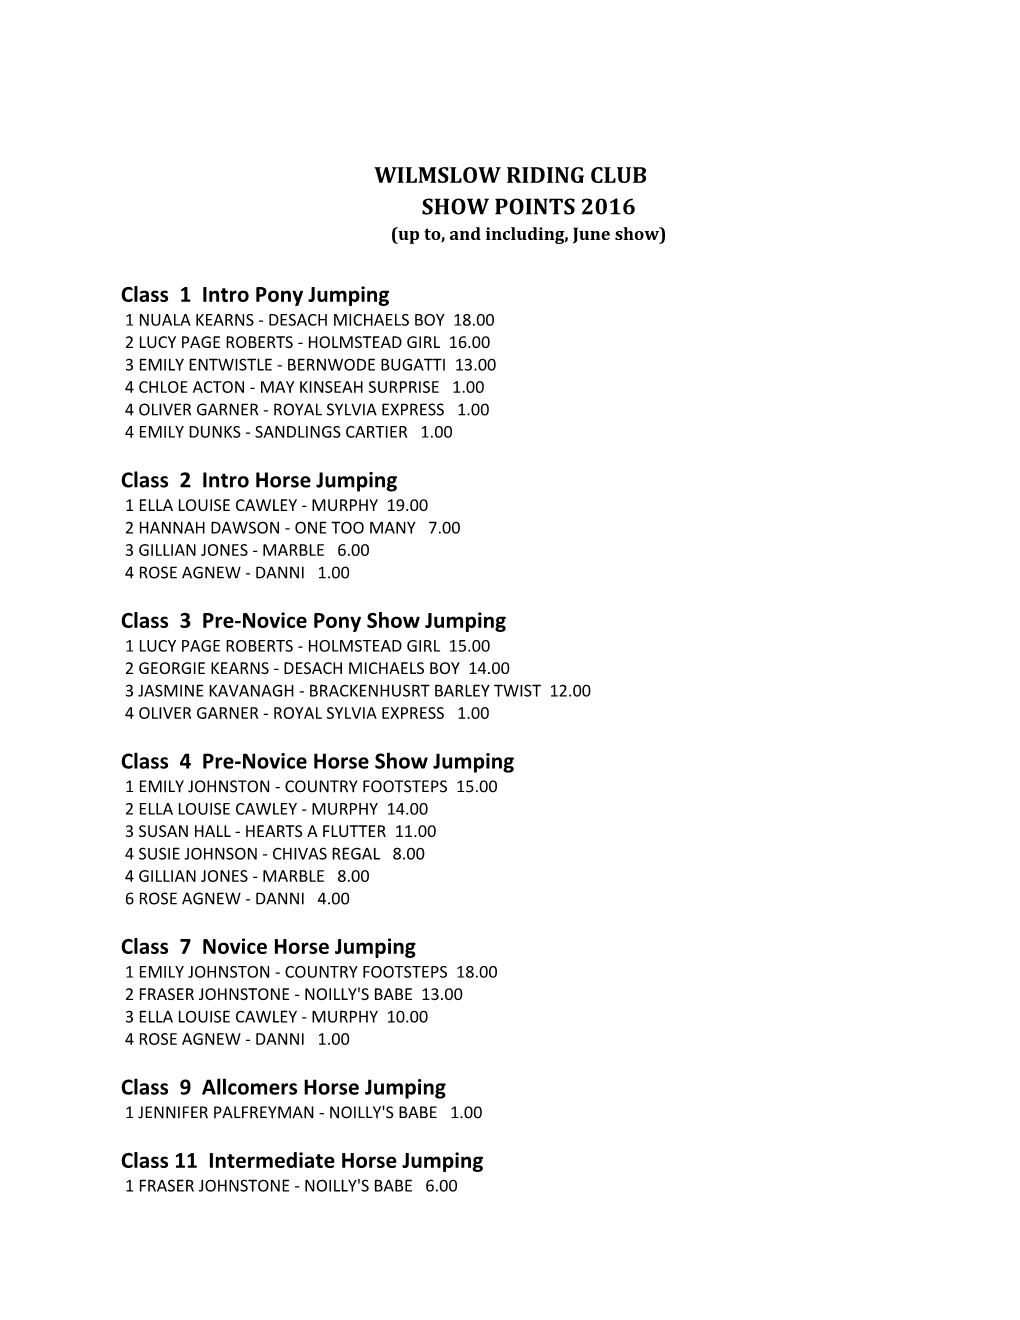 WILMSLOW RIDING CLUBSHOW POINTS 2016(Up To, and Including, June Show)